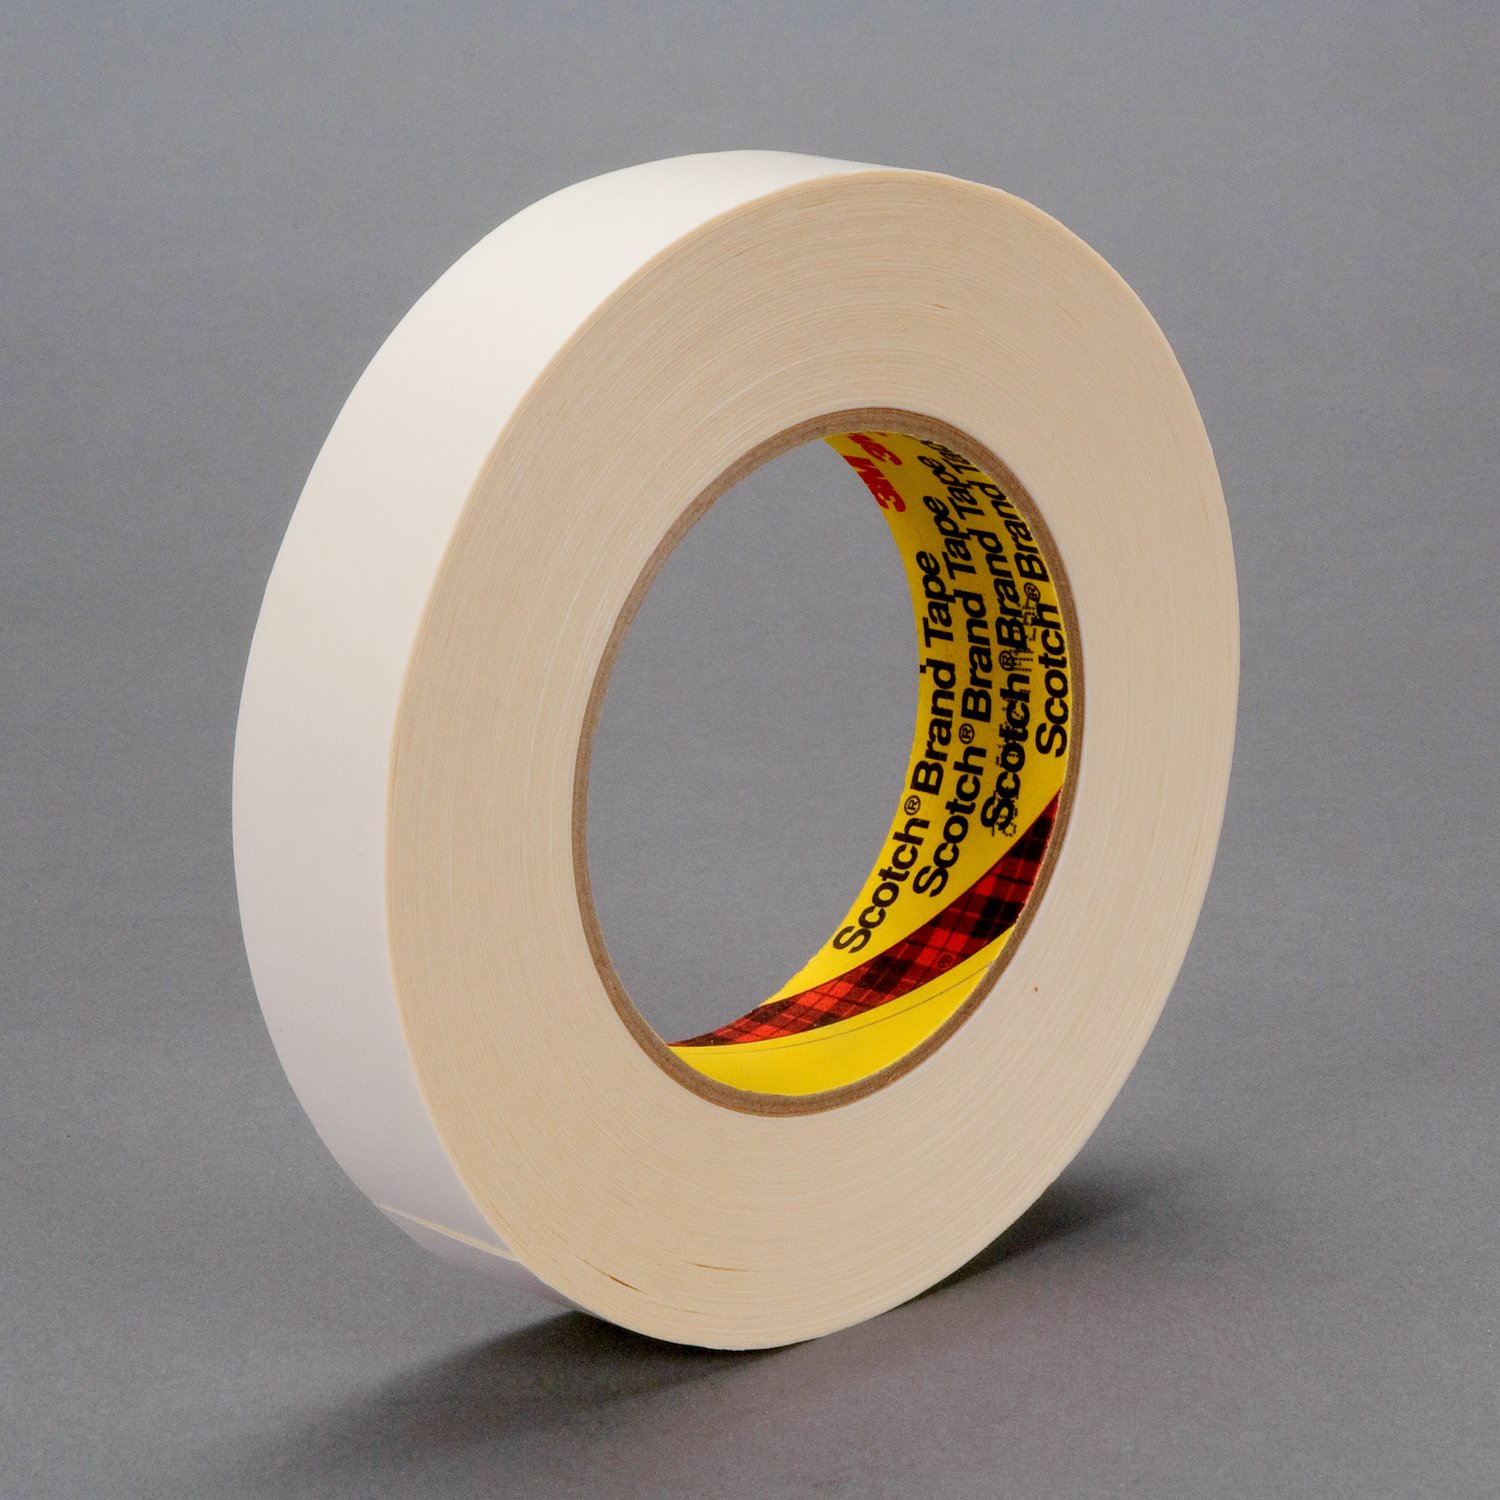 7100132910 - 3M Repulpable Double Coated Tape 9974W, White, 3.3 mil, Roll, Config